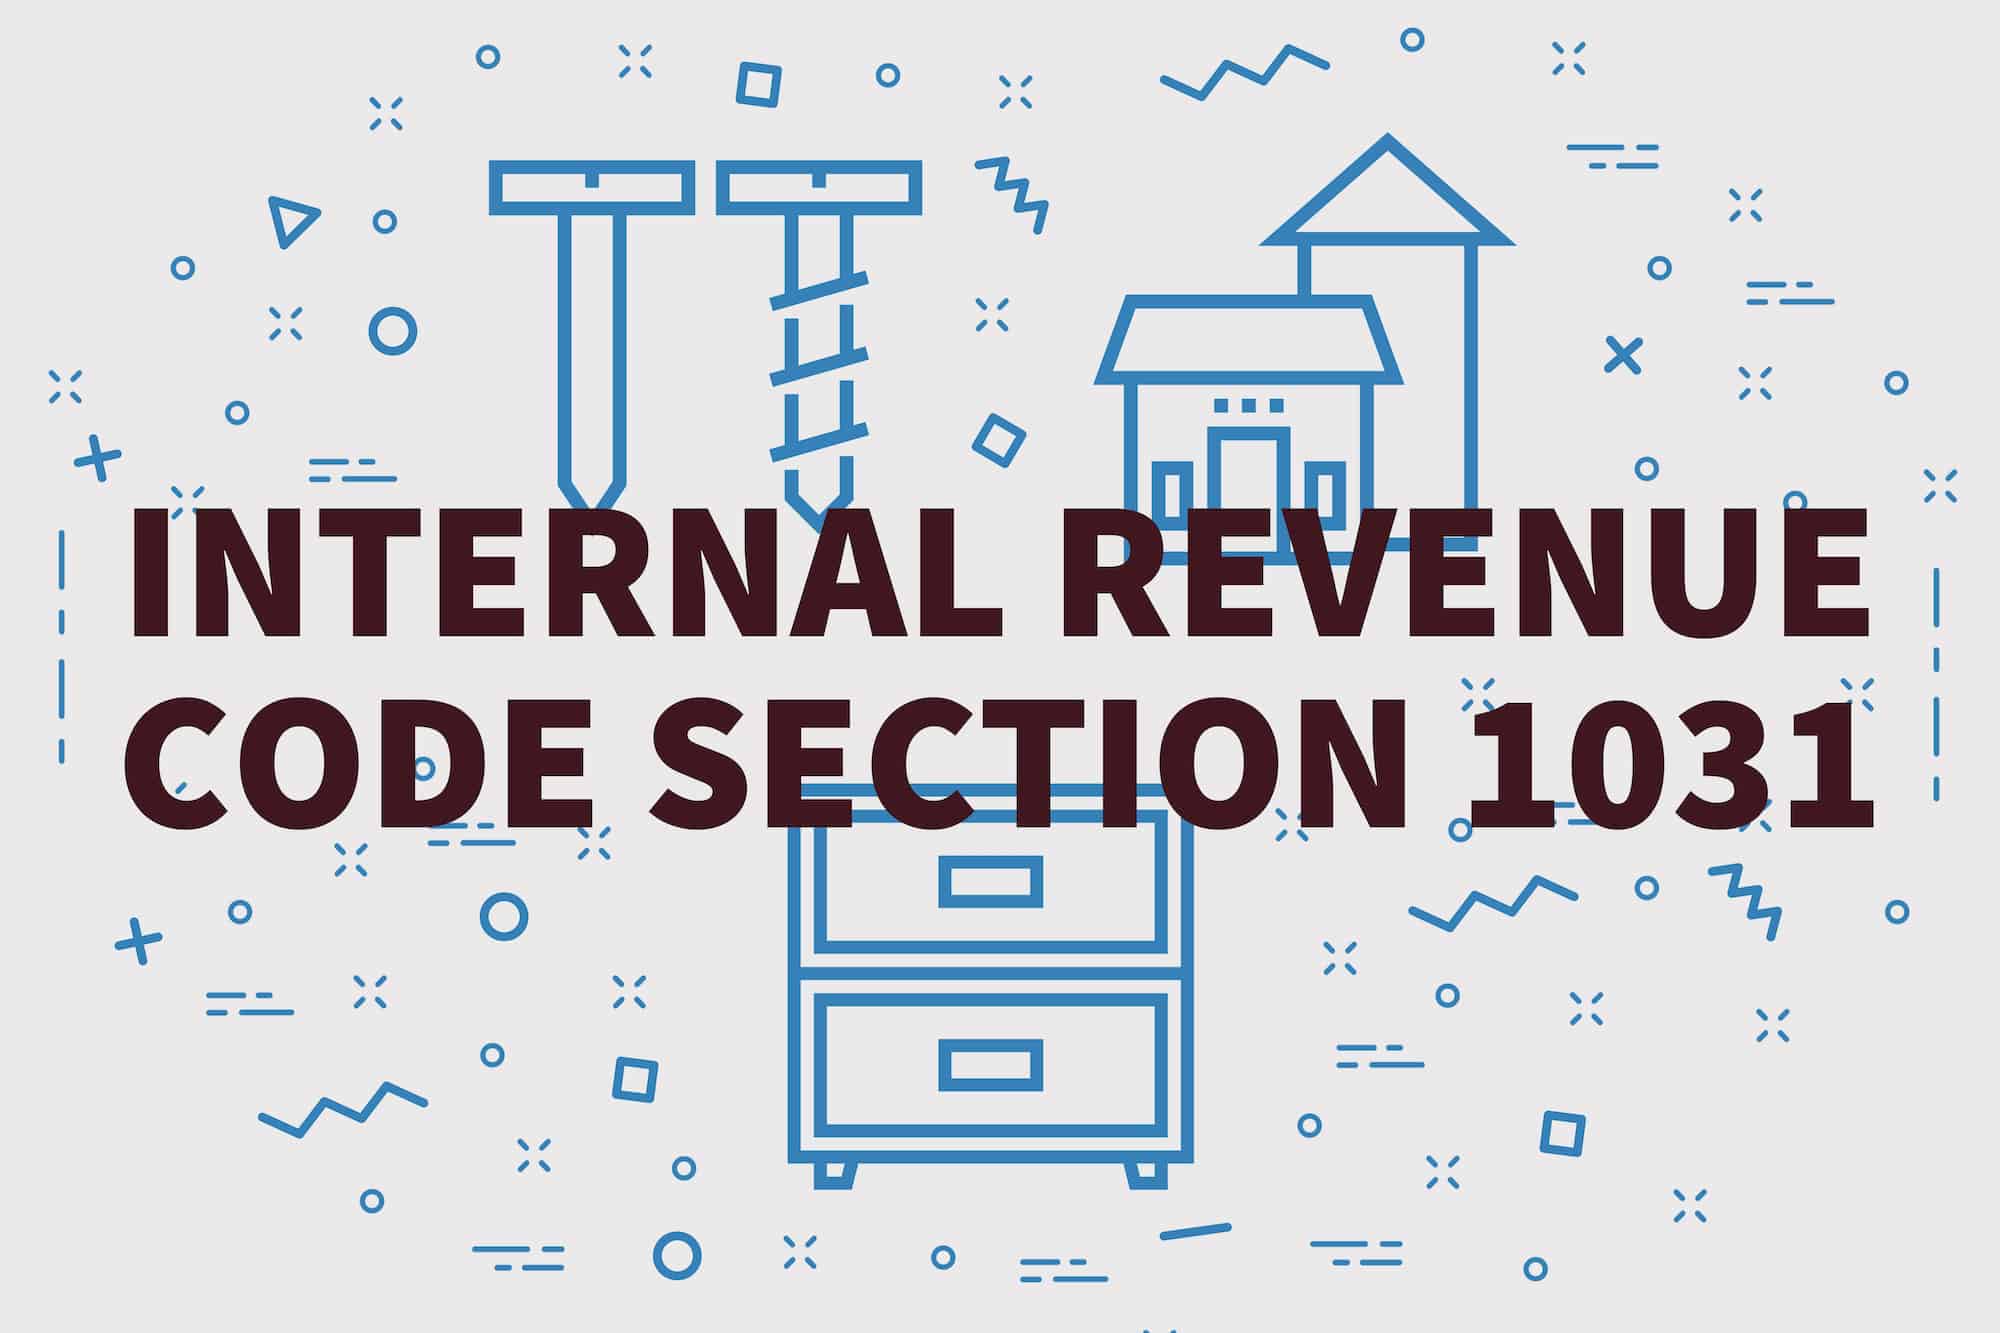 IRS Code Section 1031